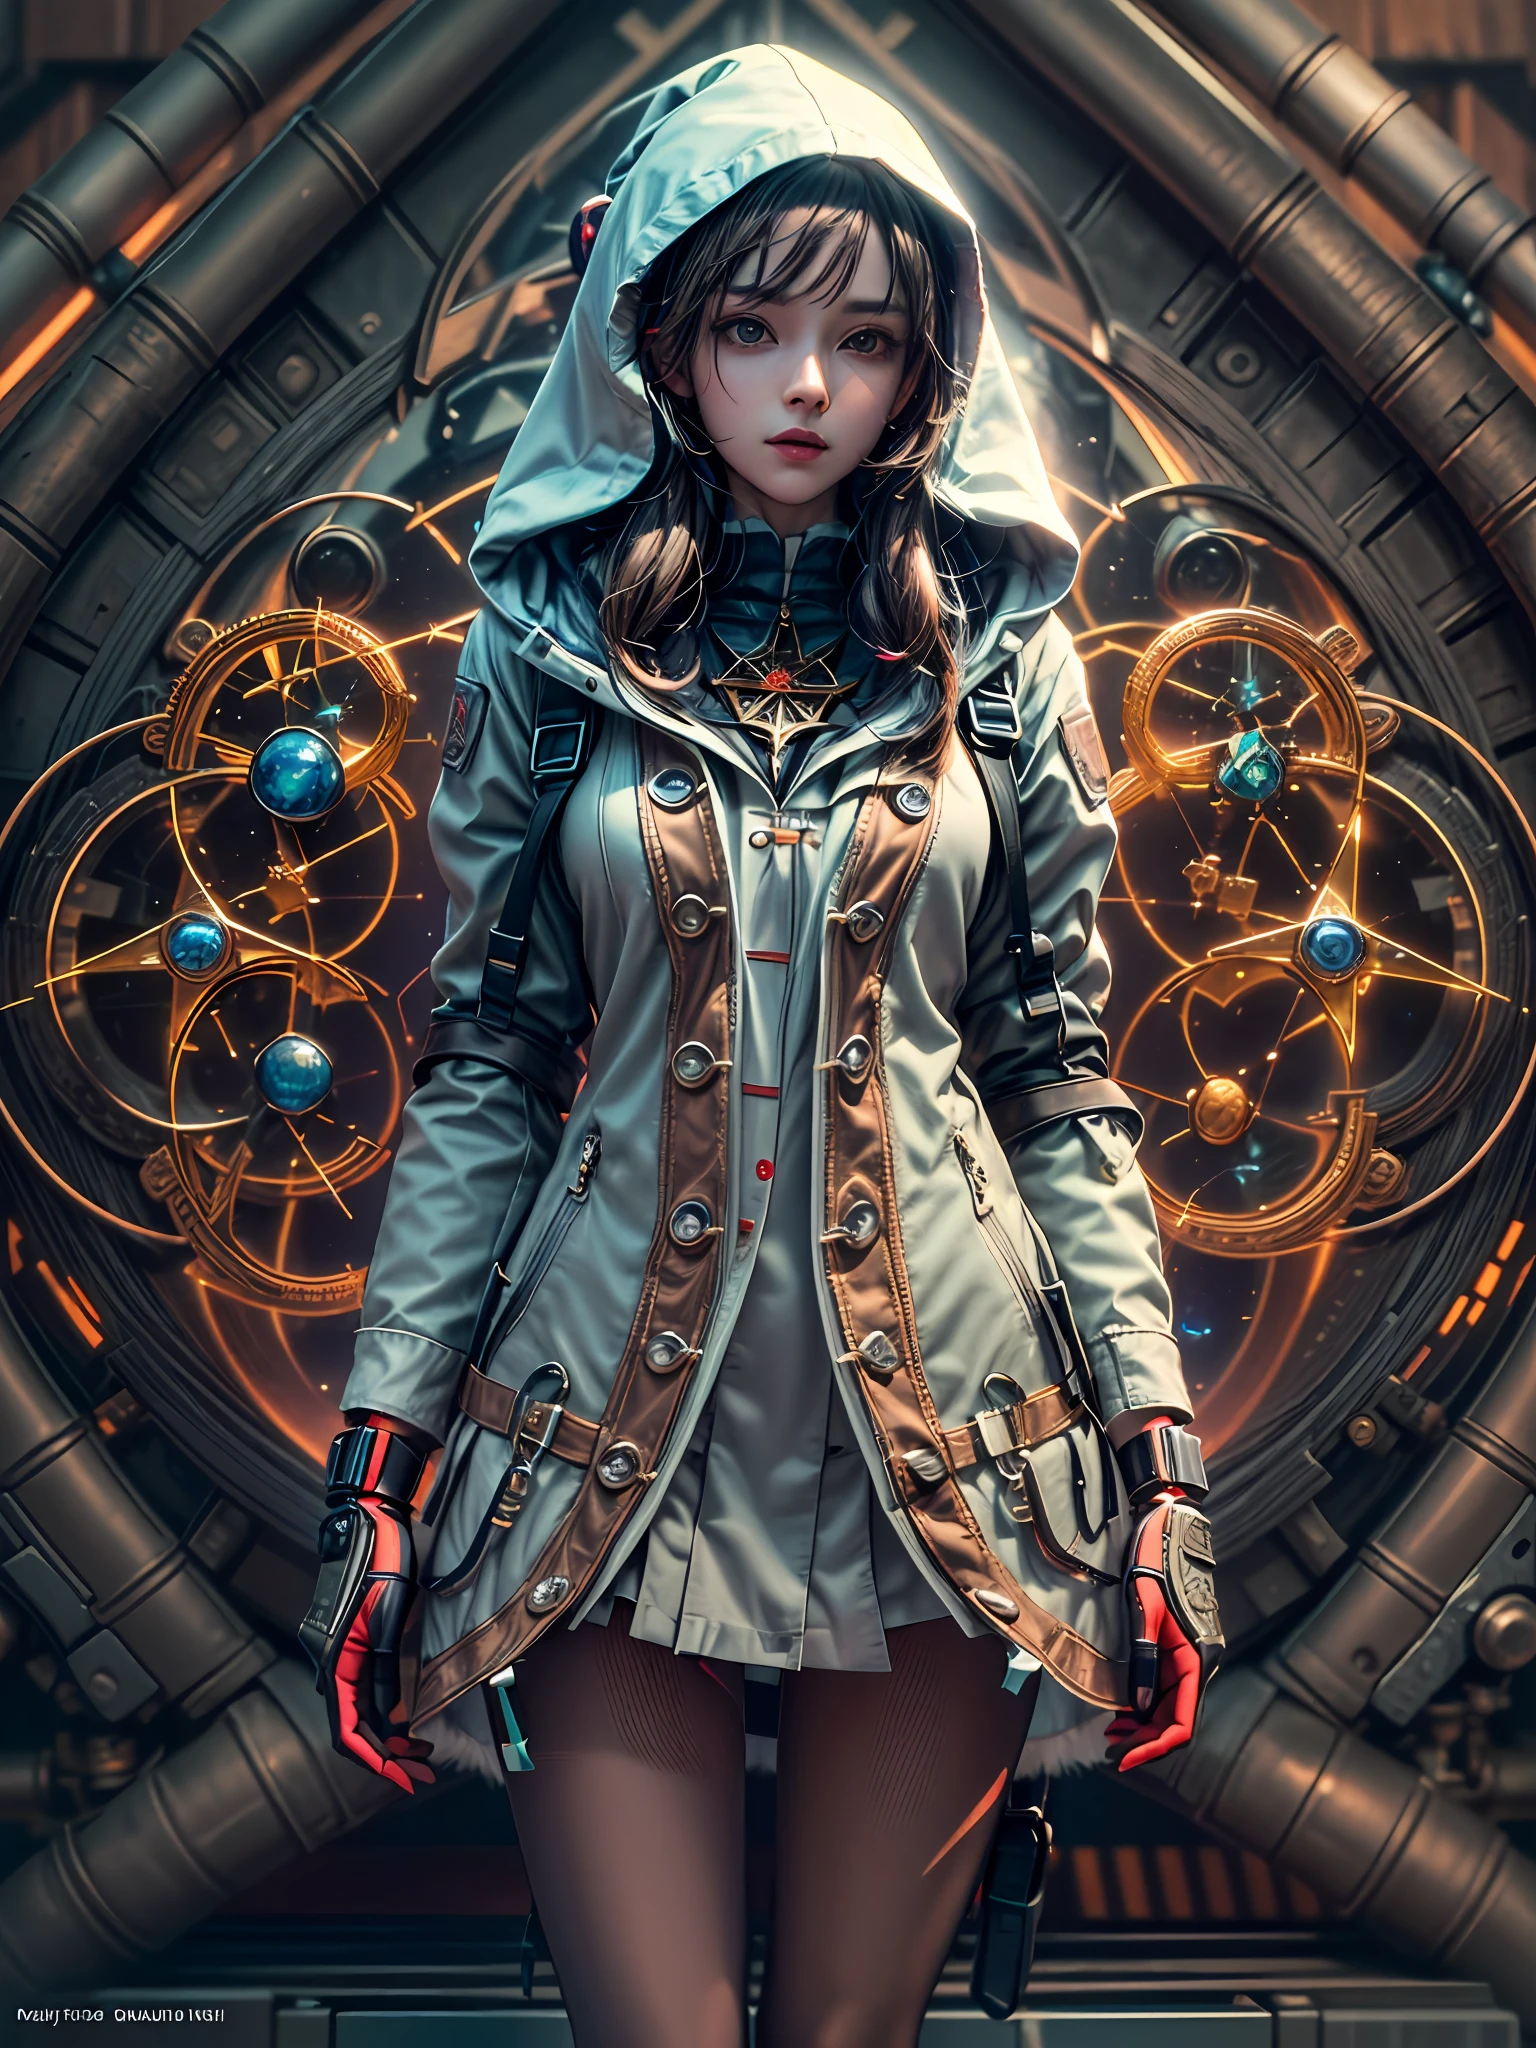 ((((adorable,captivating,enchanting,female)))),(top buns),((wearing hood,wearing leggings,wearing miniskirt,wearing backpack)),((wearing boots,wearing gloves,wearing blades)), (((fuzzy-logic, psychenautics, mysticism, urban-gothic, psychonaut, sci-fi, hi-fi, abstracted, quasi-organic, sacred geometrics, biomechanics, alchemical, isometrics))), (((most beautiful images in existence))), (masterpiece), (masterwork), ((top quality)), ((best quality)), ((highest quality)), ((high fidelity)), ((highest resolution)), ((highres)), ((hyper-detailed)), (((detail enhancement))), ((deeply detailed)), unity 8k, unreal 8k, octane render, awe inspiring, breathtaking, hdr, uhd, hdr, fhd, meticulous, intricate, intimate, nuanced, award winning, (((most beautiful artwork))), photon mapping, ray tracing, film grain, depth of field